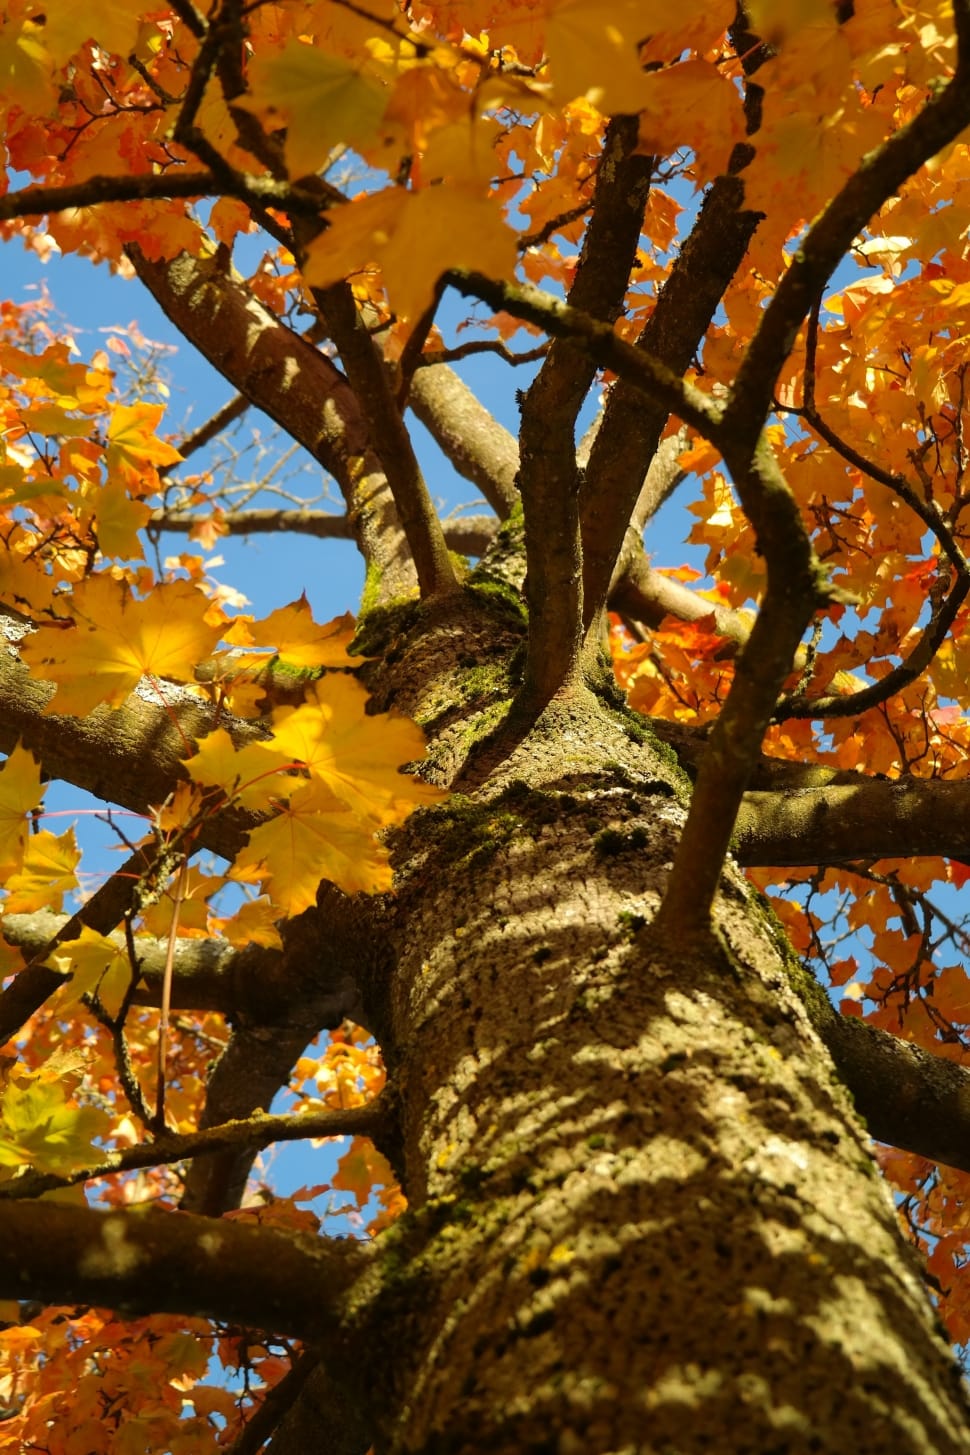 yellow leaved tree preview